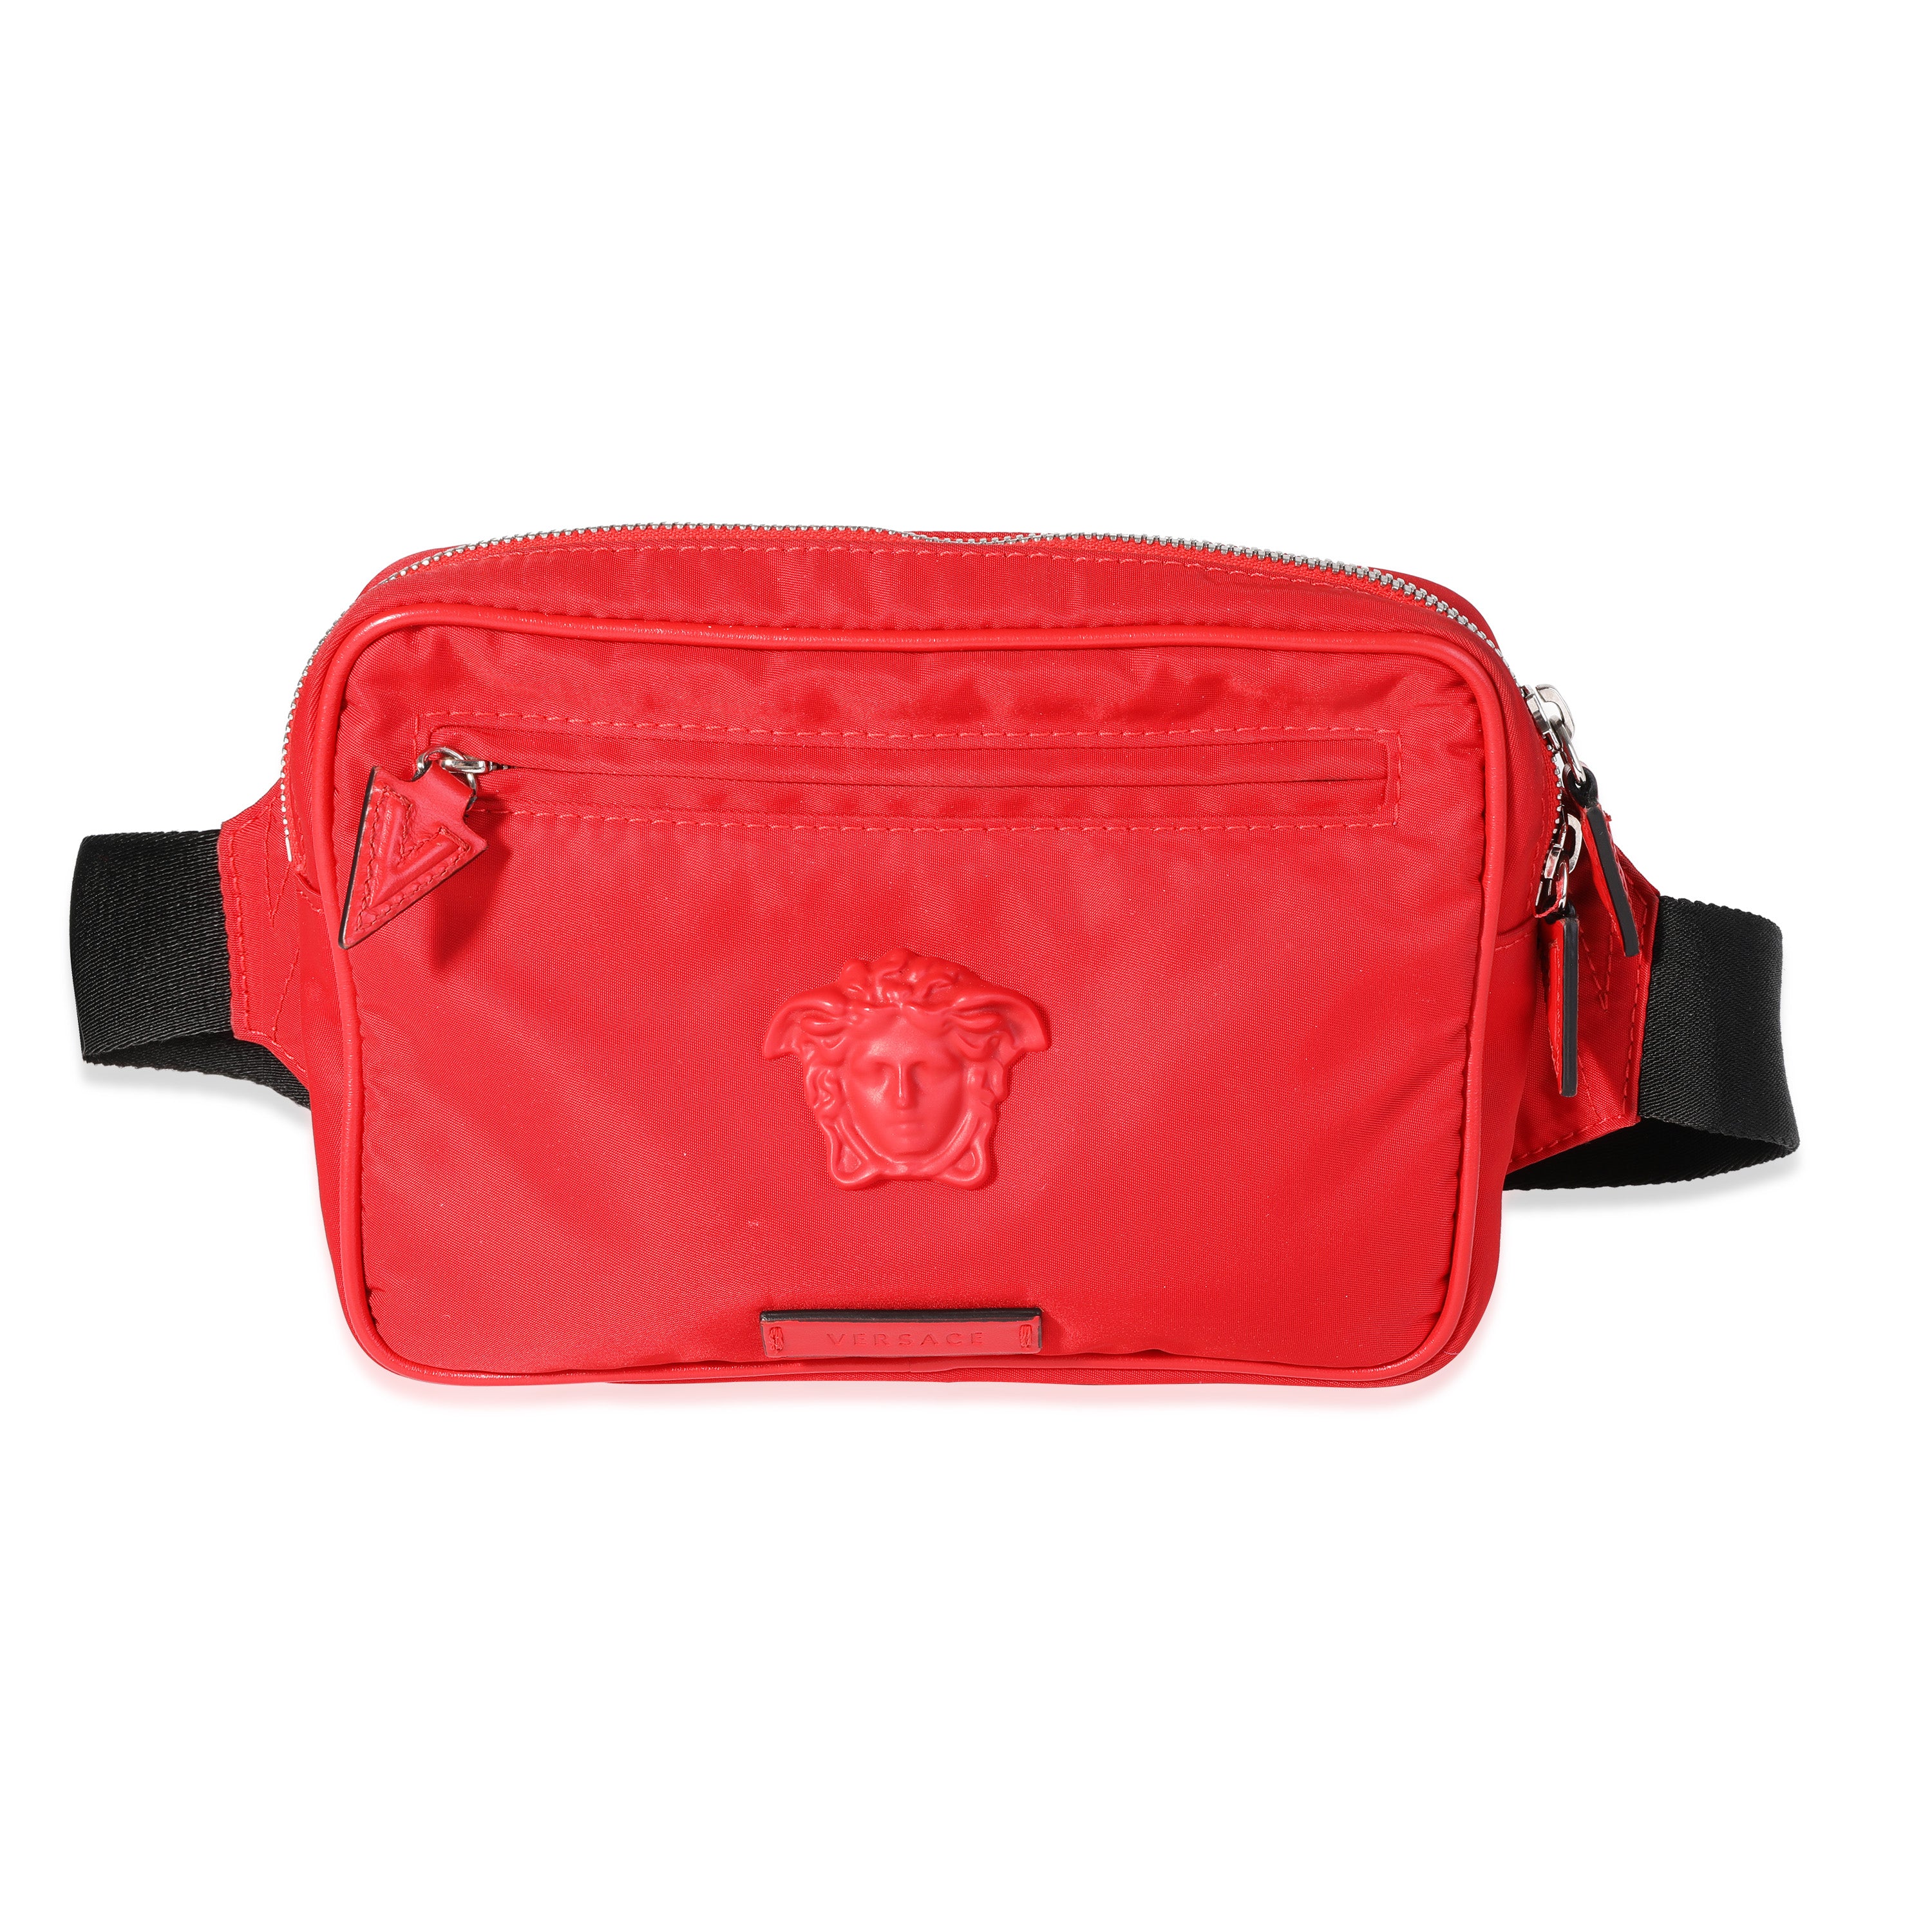 Chanel Red Suede Paris In Rome Messenger Bag, myGemma, NL